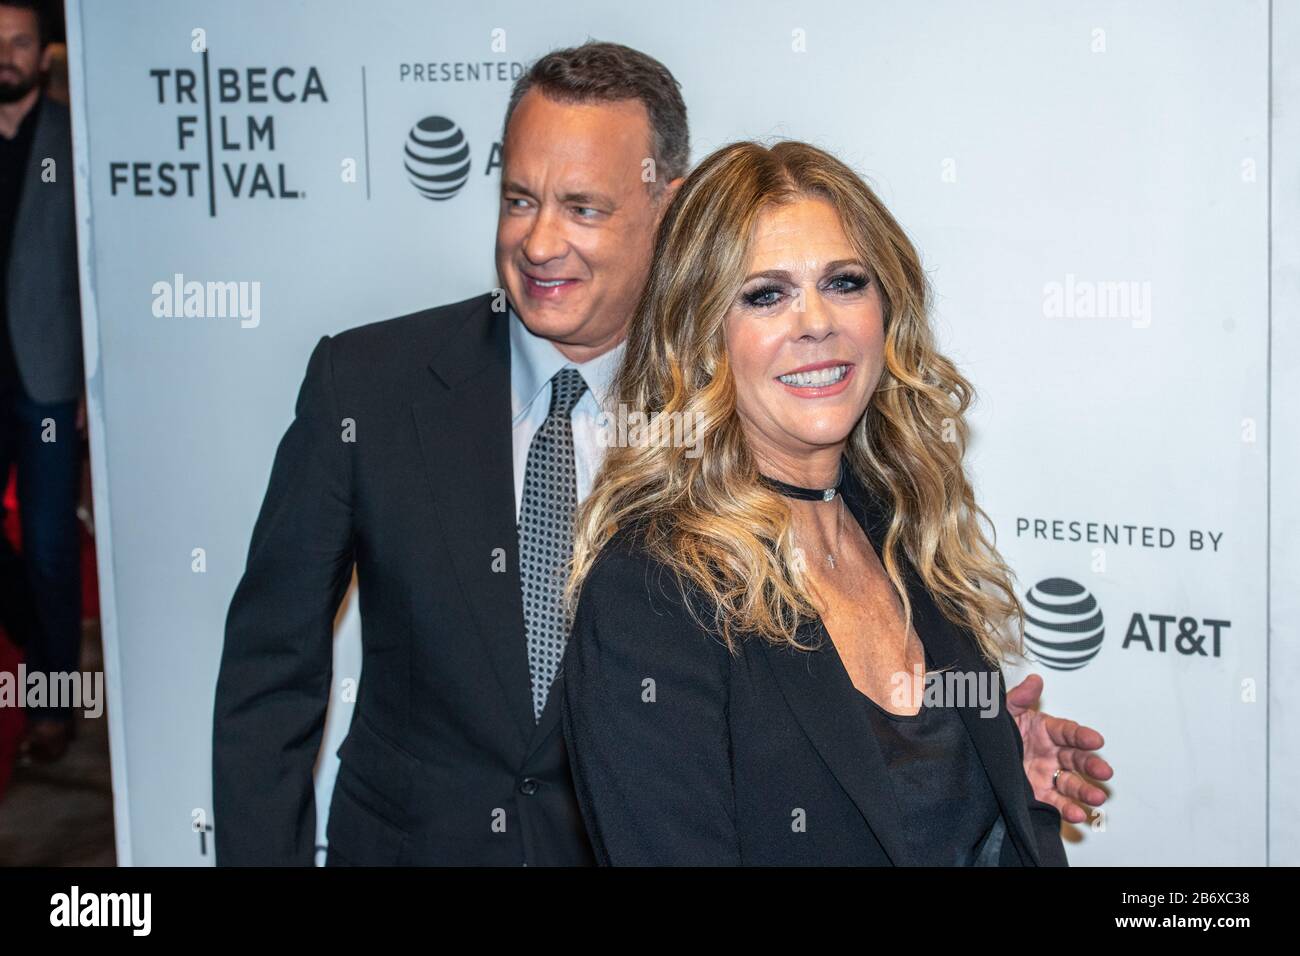 Actor Tom Hanks arrives with his wife Rita Wilson to attend the World Premiere of 'The Circle' at the 2017 Tribeca Film Festival in New York on April Stock Photo